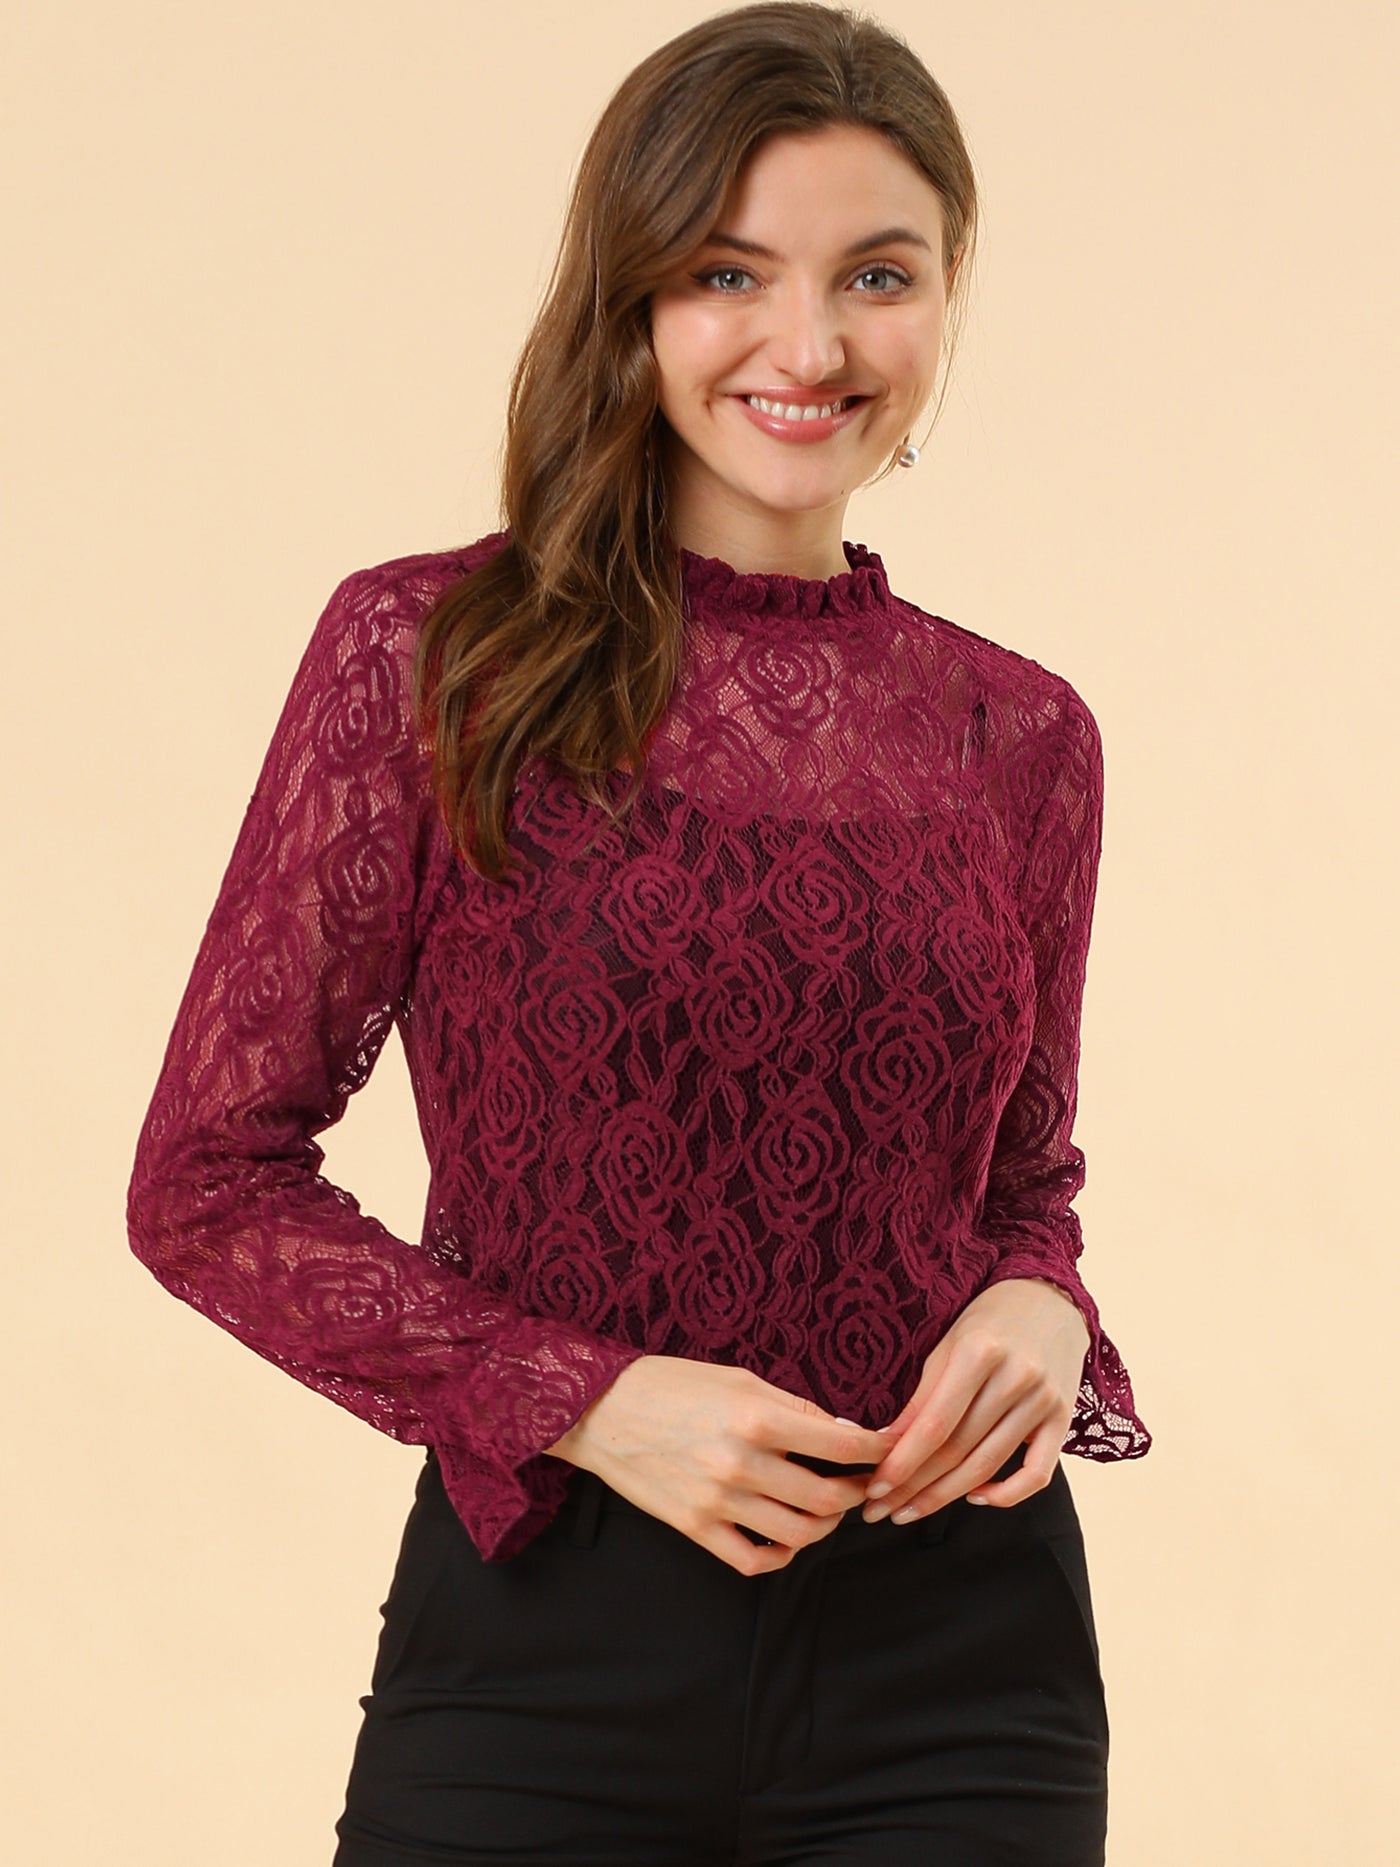 Allegra K Women's Elegant See Through Top Ruffle Frill Neck Long Sleeve Floral Lace Blouse